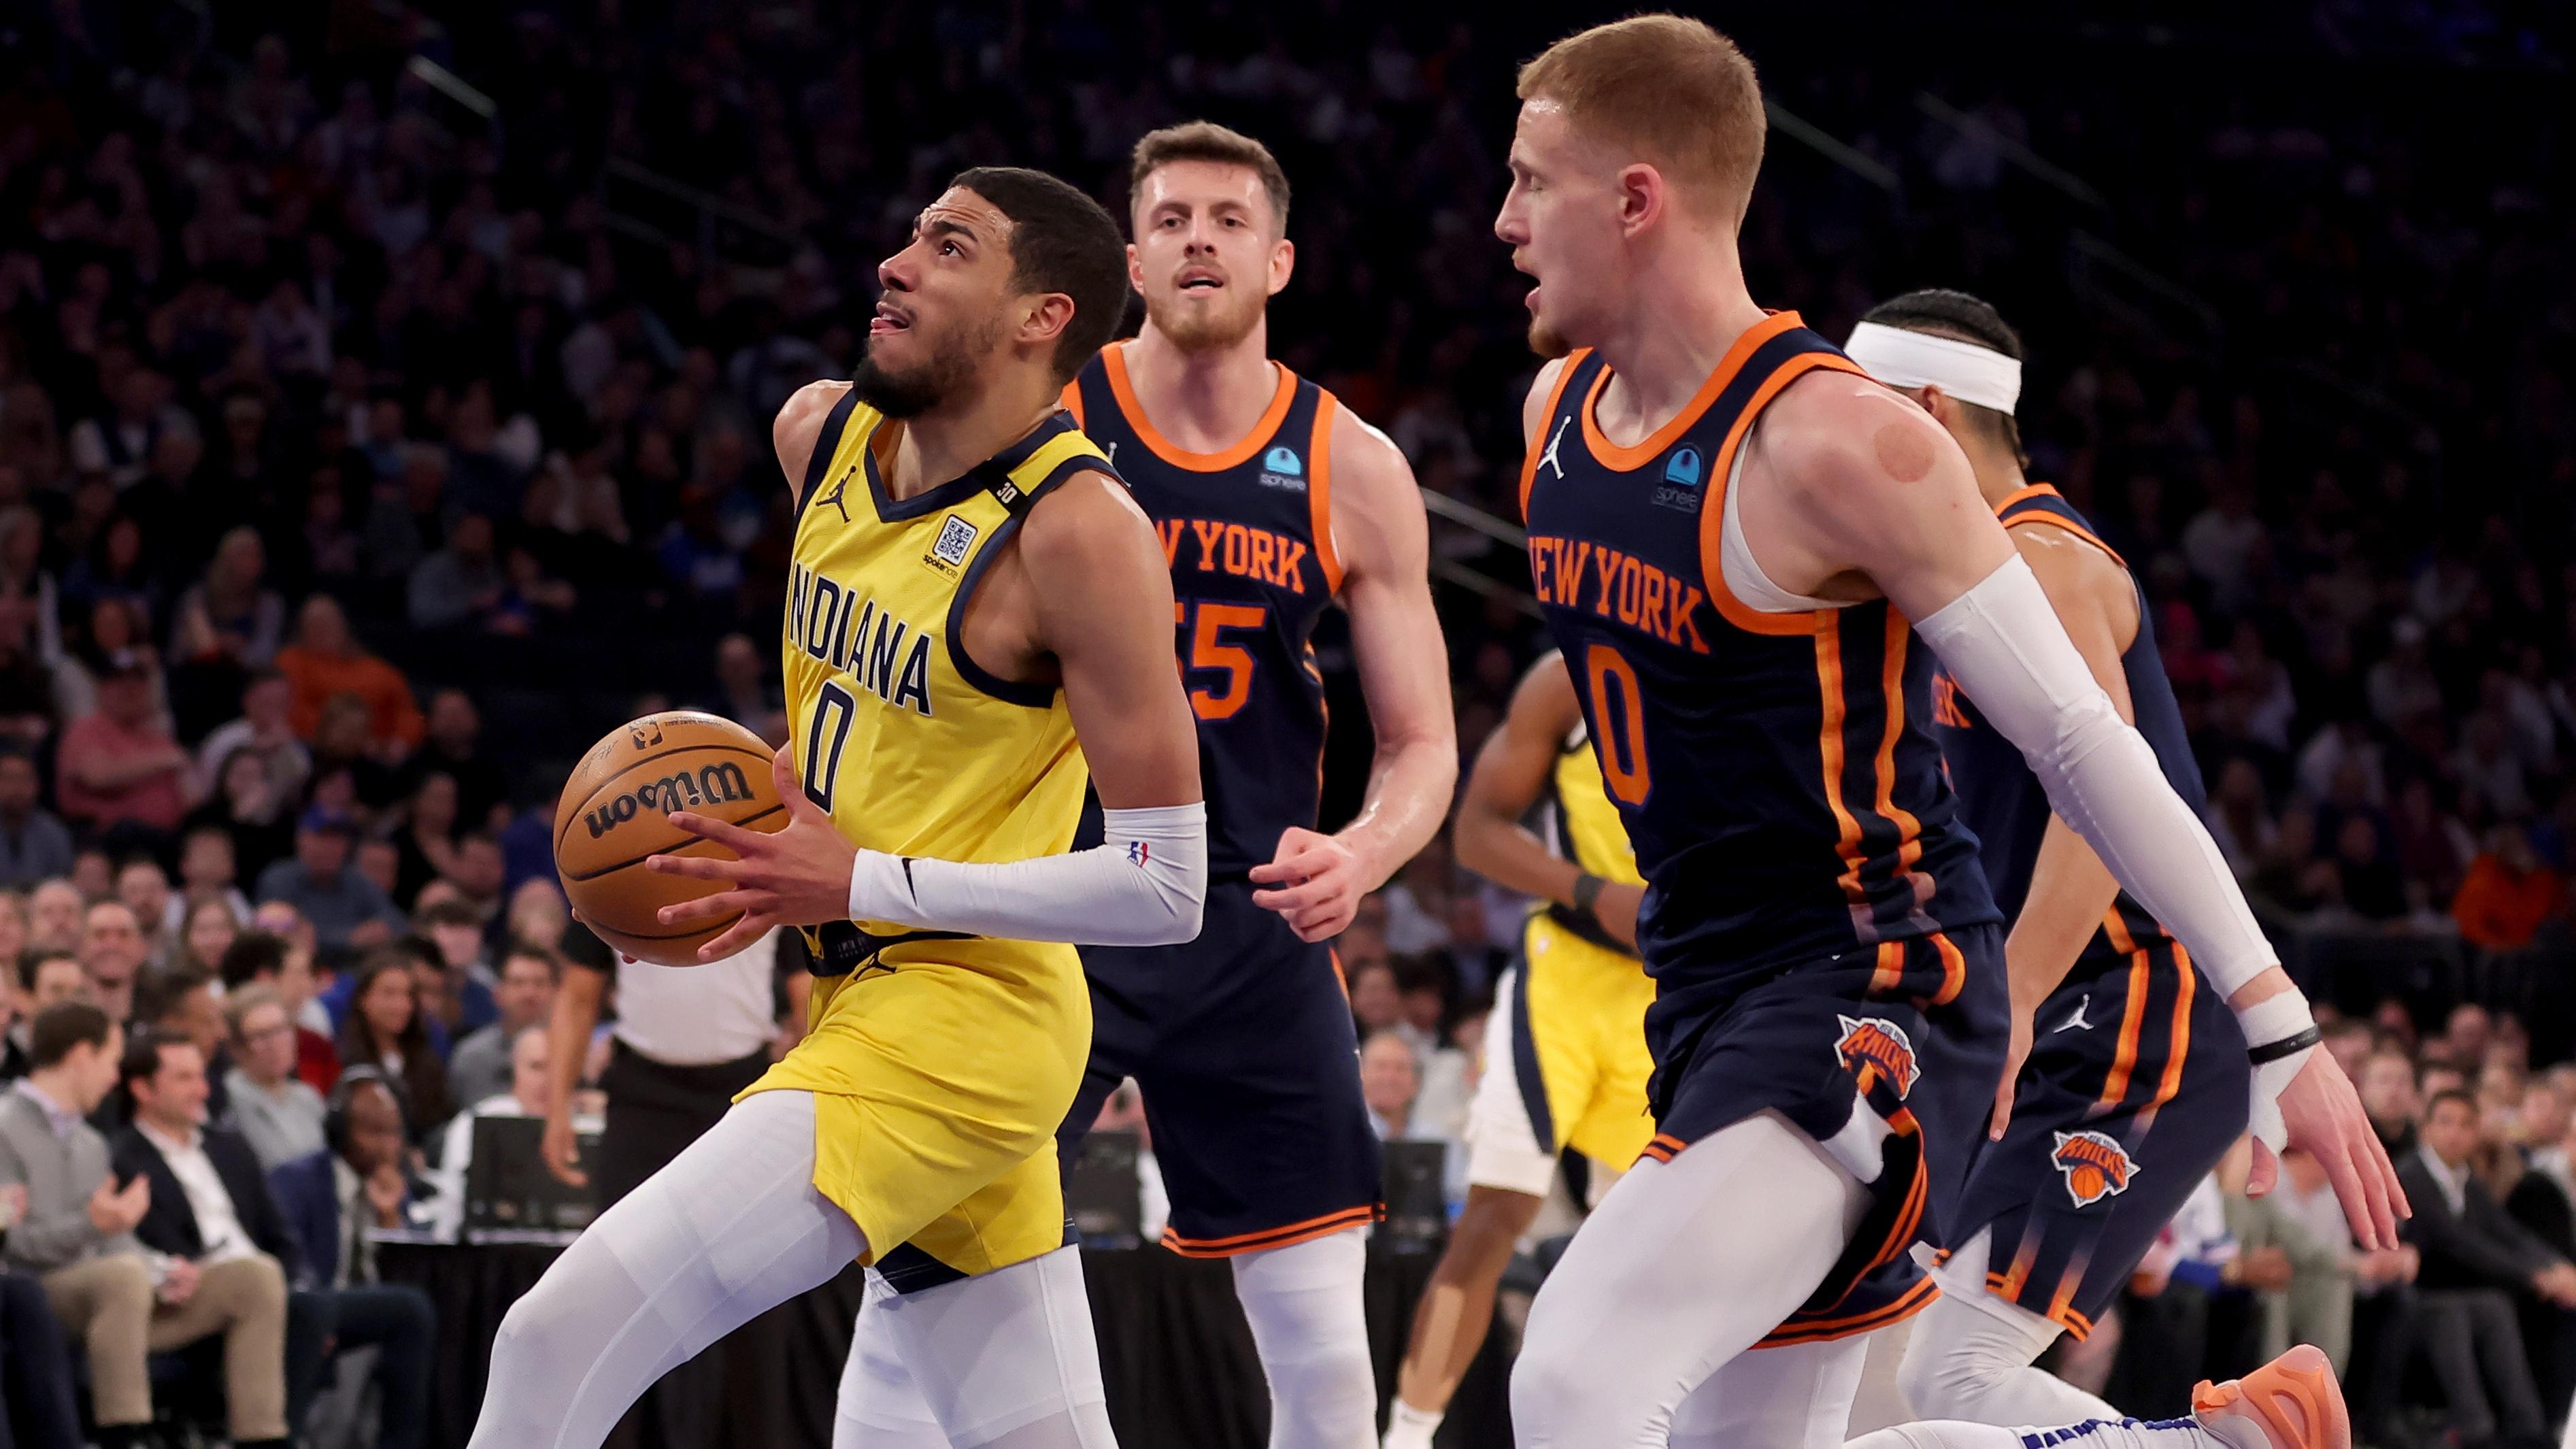 Indiana Pacers guard Tyrese Haliburton (0) drives to the basket against New York Knicks center Isaiah Hartenstein (55) and guard Donte DiVincenzo (0) during the first quarter at Madison Square Garden / Brad Penner - USA TODAY Sports